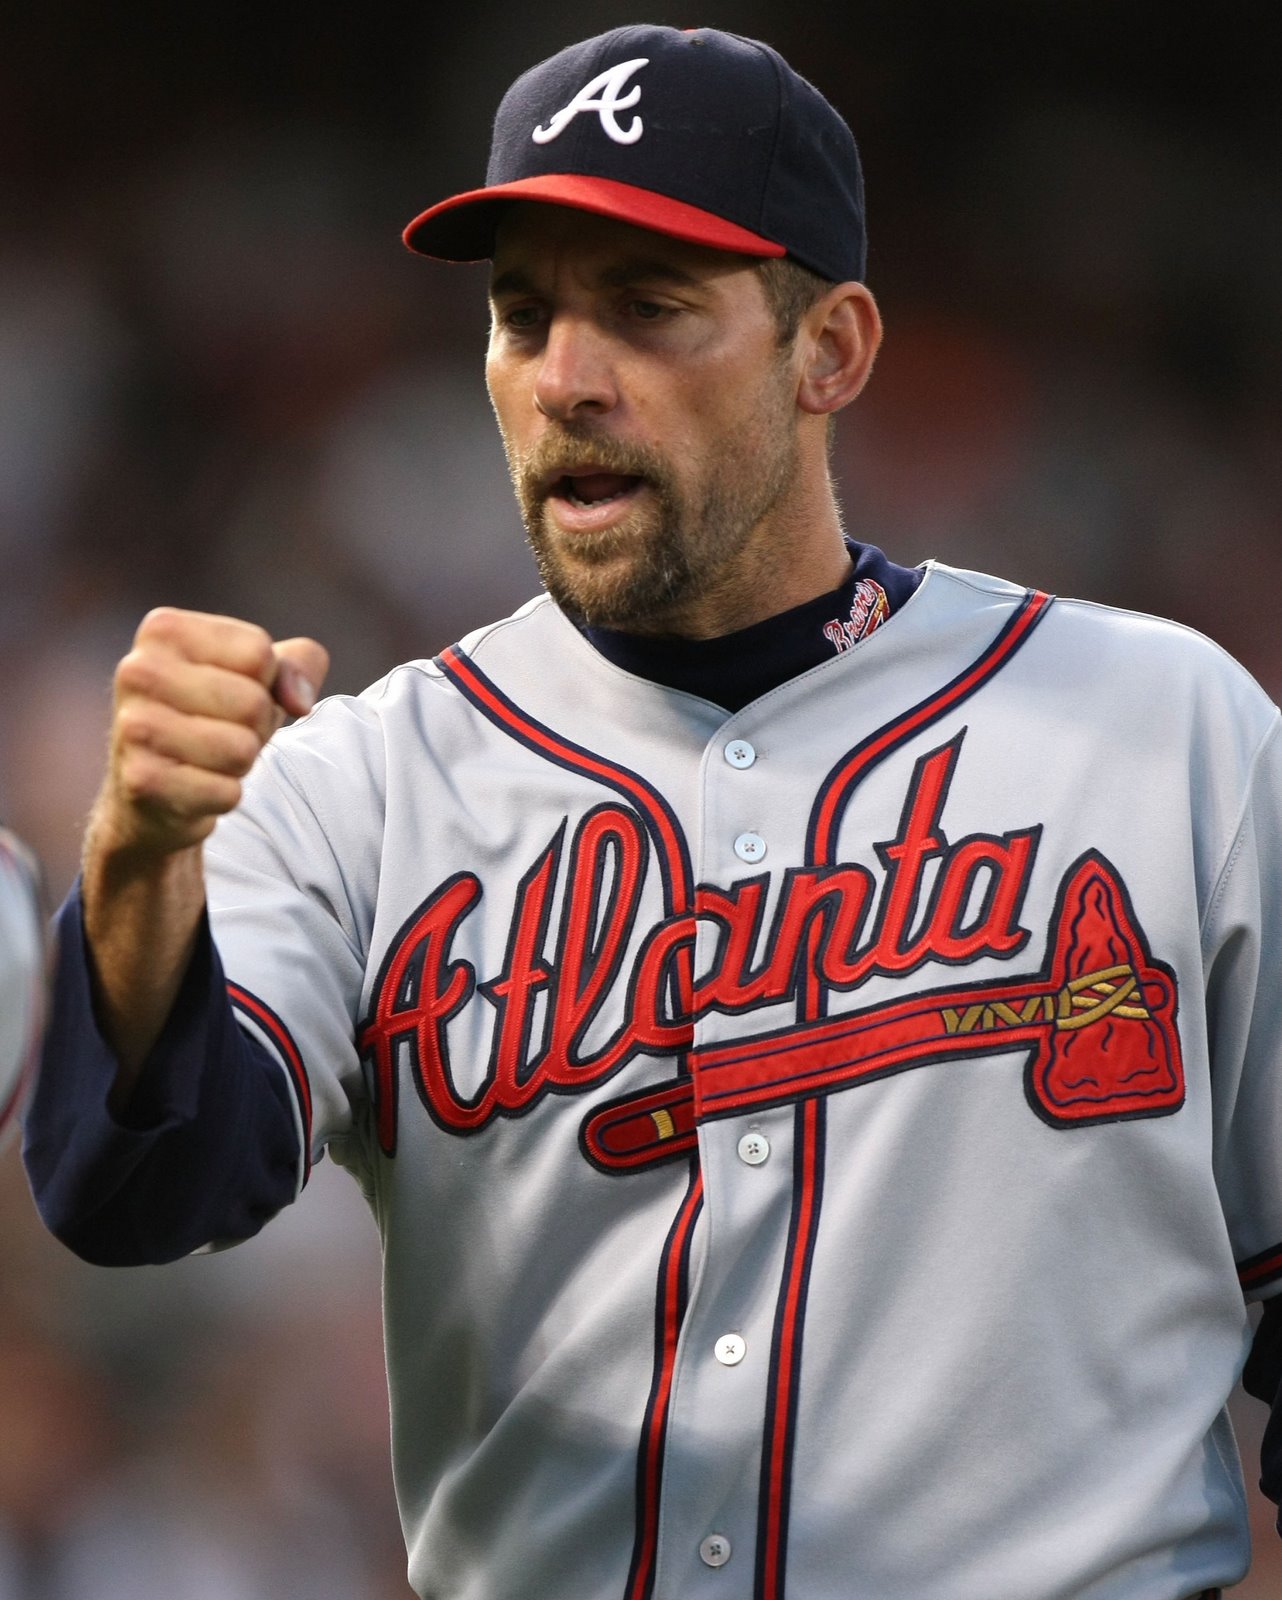 John Smoltz: Some of his greatest games